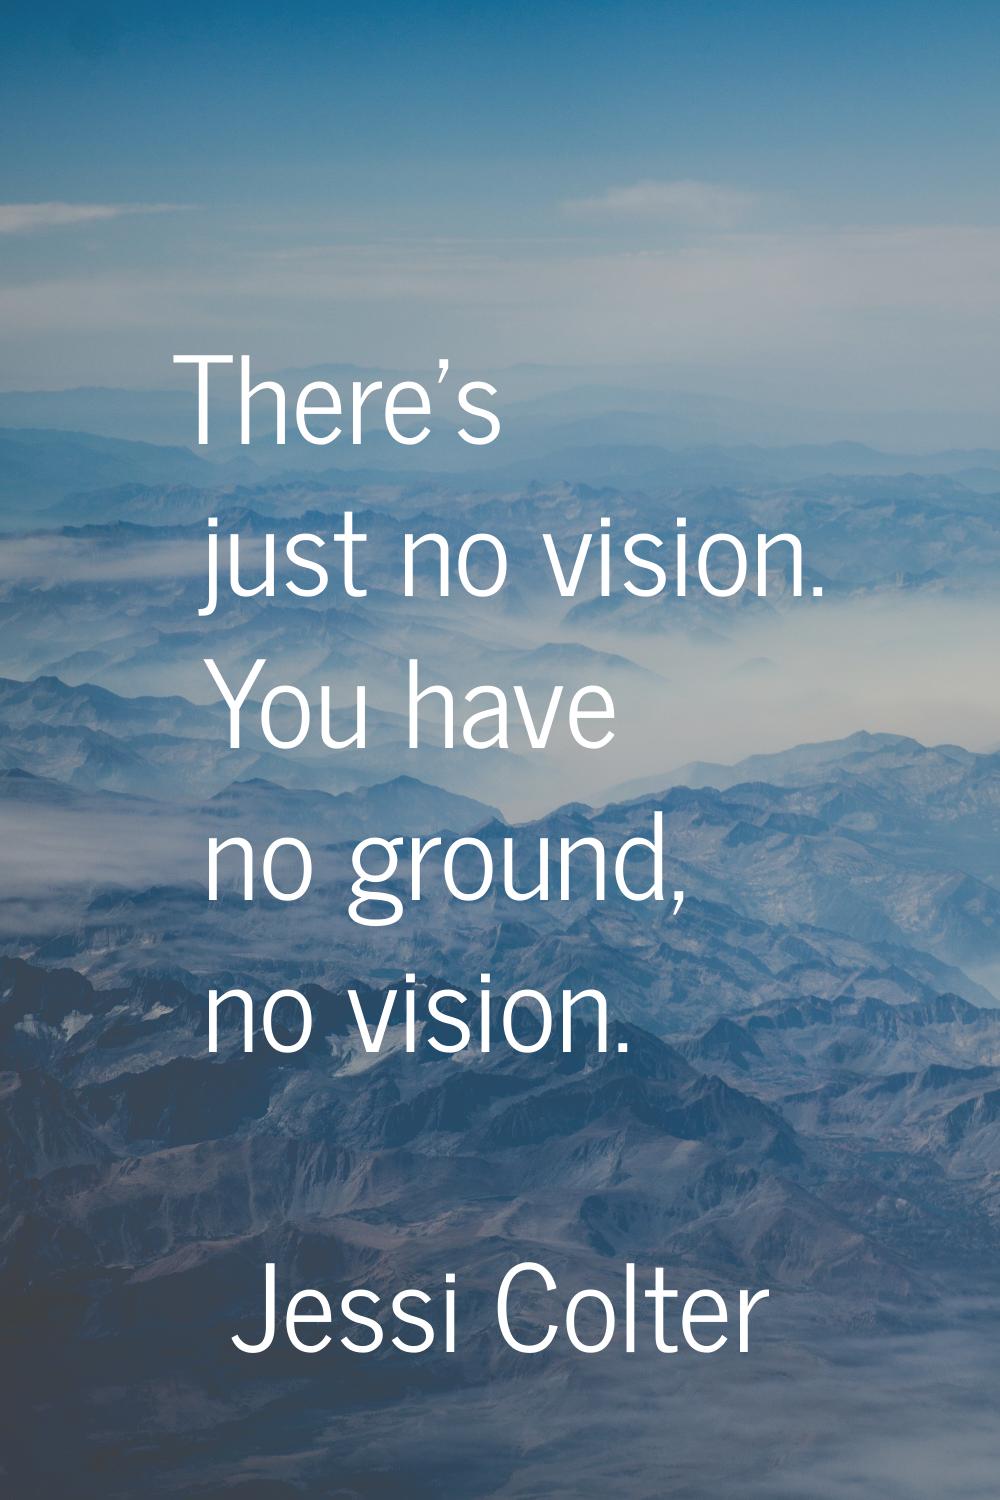 There's just no vision. You have no ground, no vision.